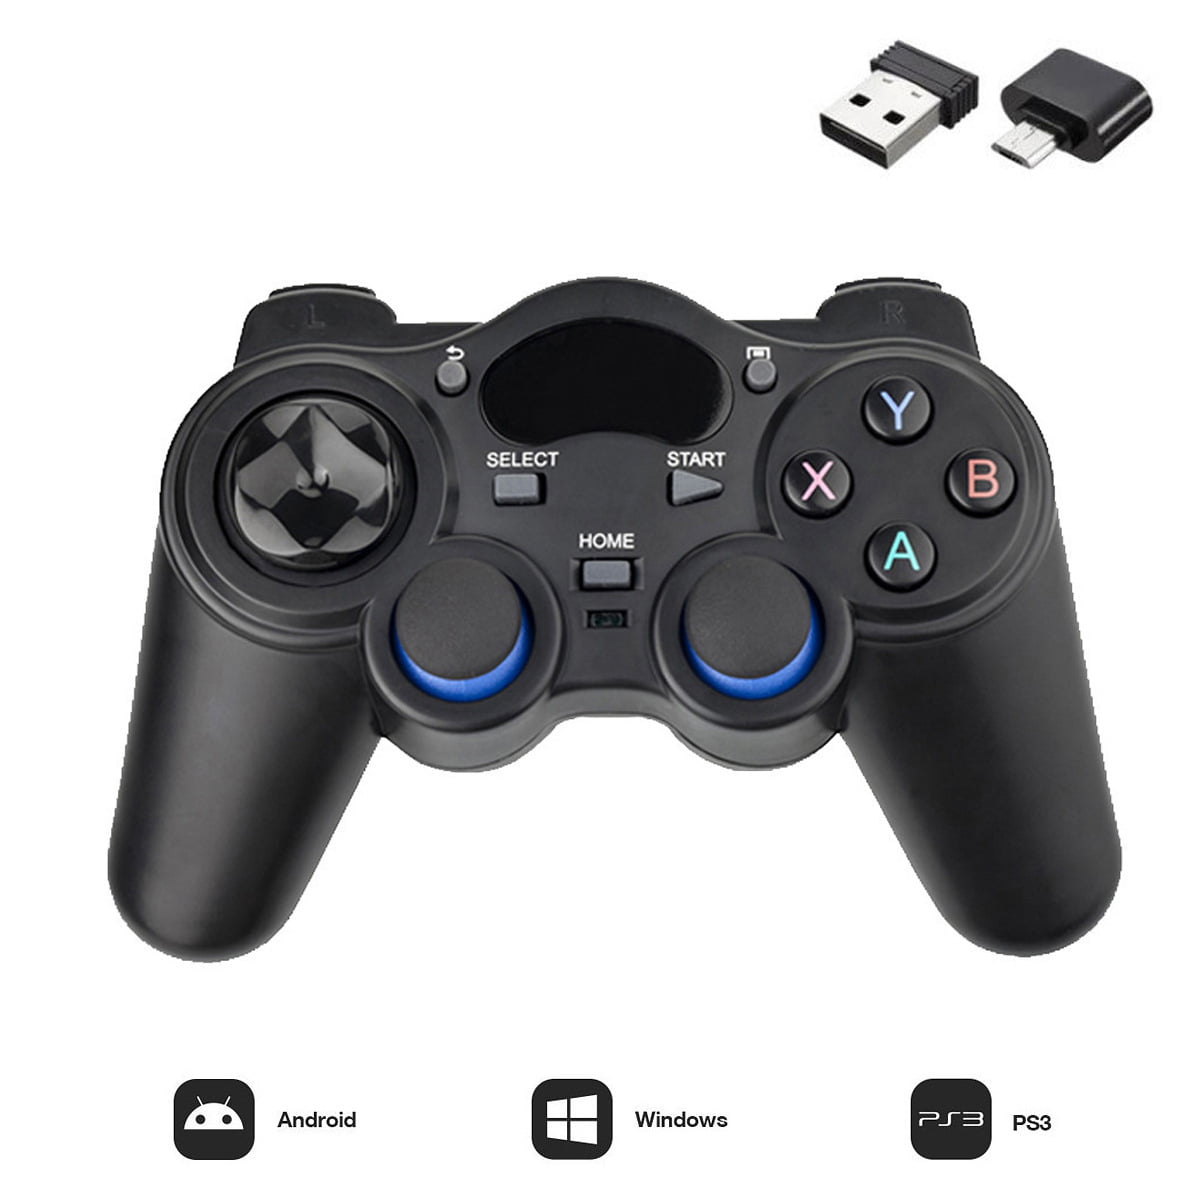 Actie Wie Mail 2.4 G Controller Gamepad Android Wireless Joystick Joypad With Otg  Converter For Ps3/Smart Phone For Tablet Pc Smart Tv Box - Walmart.com -  Walmart.com